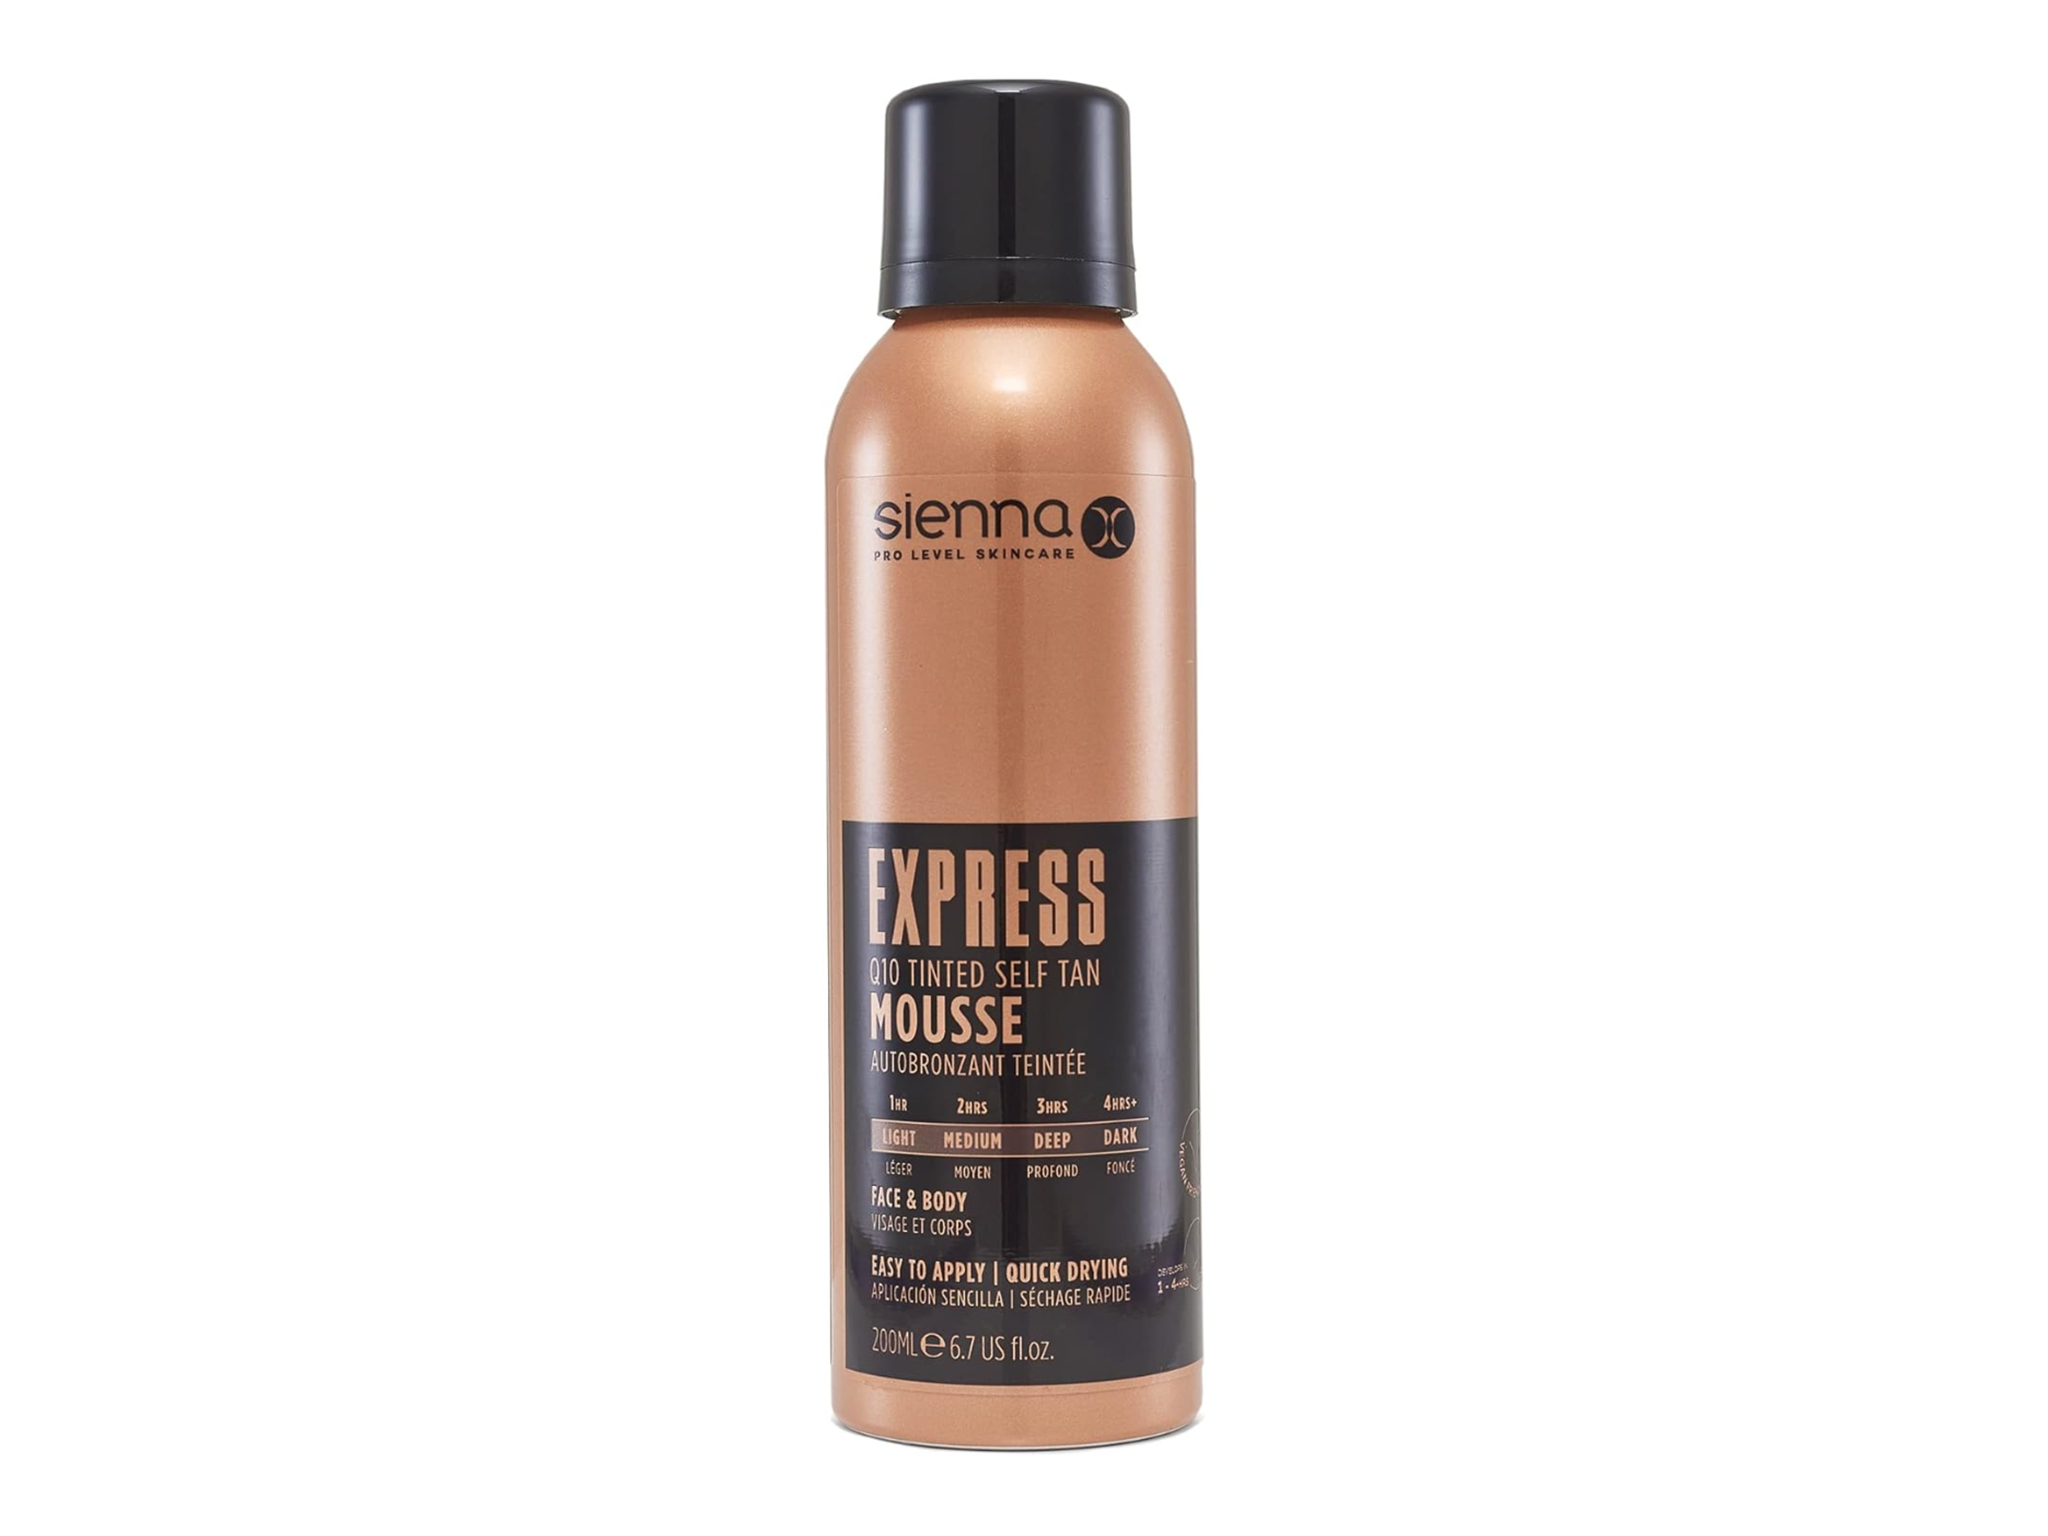 Sienna X express tinted mousse